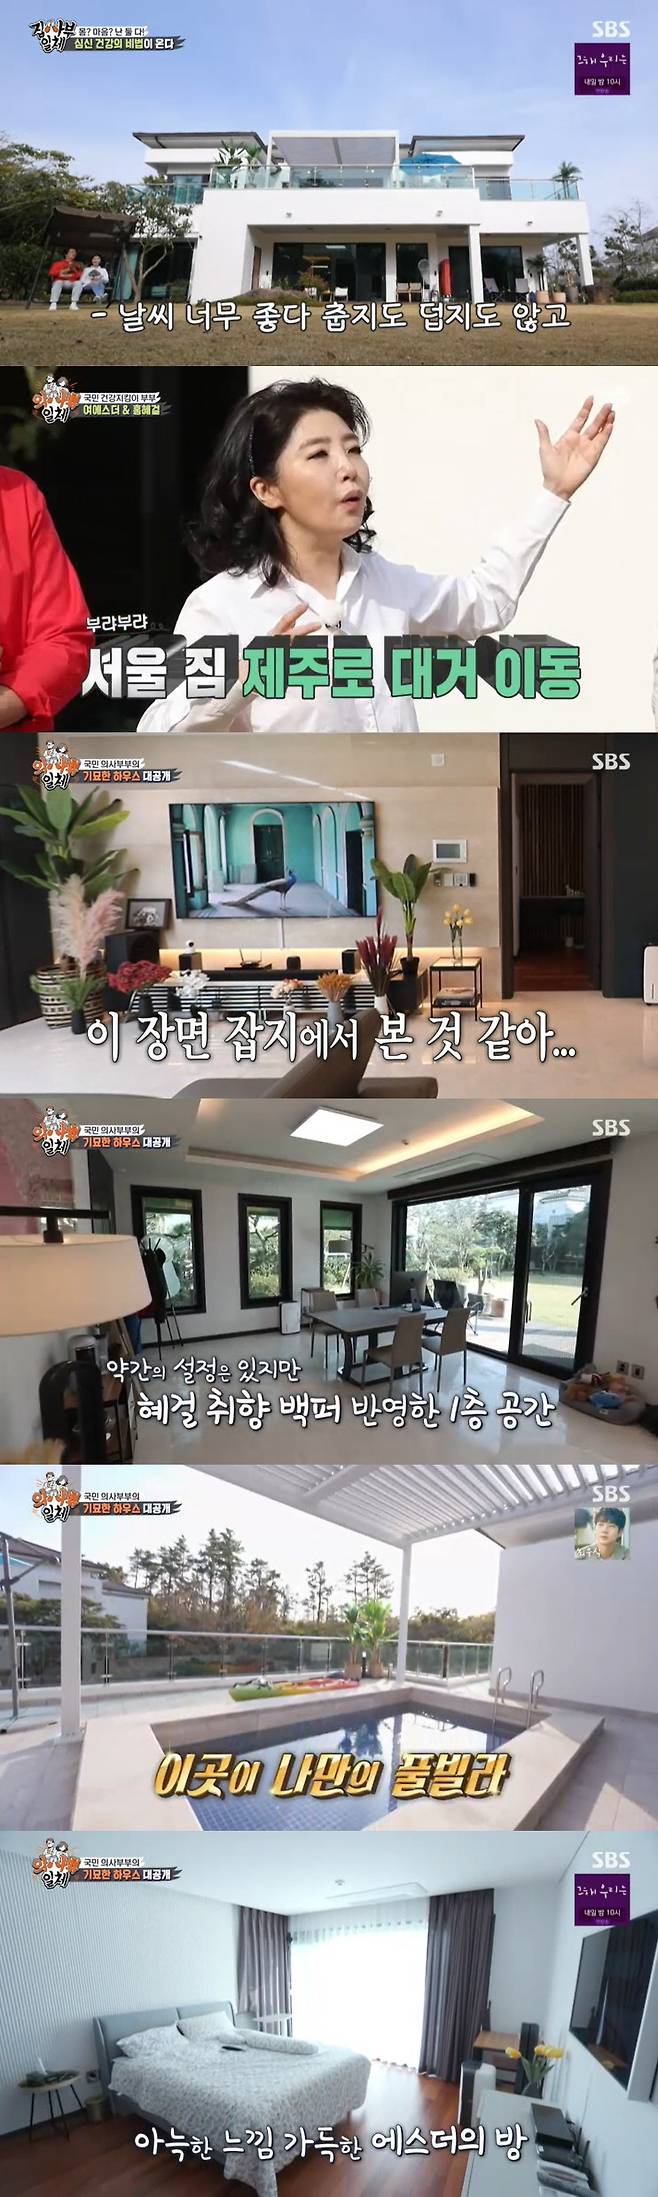 All The Butlers Hong Hye-geol Yeo Esther couple have unveiled each house life rather than each room.On the 5th, SBS entertainment program All The Butlers revealed the life of Jeju Island of the Hong Hye-geol Yeo Esther couple.The couples house, located in Jeju Island, was located in a beautiful landscape that would appear in the advertisement.The couple boasted of their extraordinary chemistry, starting with their introduction.Yeo Esther said that in Seoul, Hong Hye-geol is down to Jeju Island and Husband has set up a house in Jeju Island for health.From housing to Madang Interiors, all of them were touched by Hong Hye-geol.Hong Hye-geol said he planted it because of the broadcast about the reed in Madang, and Yeo Esther also  (Hong Hye-geol) dug it up because All The Butlers is coming.I brought all the luggage in Seoul, Disclosure said.The couples house was set up a bit but boasted a neat panoramic view and interiors; the first floor was the space of Hong Hye-geol and the second floor was the space of Yeo Esther.There was also a self-defense axe that was actually used next to Hong Hye-geols bedThe space on the second floor Yeo Esther was open to the pool on the terrace.Unlike the space of Hong Hye-geol, which was a modern interior, Yeo Esthers space was cozy.Yeo Esther uses a body-filled for waist health, saying, If you lie on the left side and sleep, you will have less pressure on your heart.On the reason why I brought all the soul luggage for All The Butlers, Hong Hye-geol said, There was a rumor that I was taken by my wife and went to Jeju Island.I did not want to see a man living alone, so I decorated it with a gorgeous look. As for the reason why the couple use the house separately, I decided to maintain a friendliness indifference because of health.I thought it would be better to live separately for each others Immunity as Menopausal came to each other. Two people who said that their minds were stable and healthy after living separately.Hong Hye-geol said: My wife also has a lot of chronic illnesses - brain aneurysms, asthma and depression.I also have discs, tuberculosis, and liver Kwon Yuri shade just before lung cancer, said Yeo Esther, dont think serious: we Husband lung cancer hijack.It is not lung cancer, but it is called lung cancer. Hong Hye-geol said: The reason I came to Jeju Island was that I had a strange lung during a health checkup, which is the Kwon Yuri shade.Its two centimeters long, and when you take it off, its more than 99% cancerous cells. But sometimes its not like cancer.I posted this on SNS and it was said that I had lung cancer, so it became a national irrigation.I feel comfortable, she said.The couple decided to tell the members of All The Butlers and how to keep health from cancer for viewers.Yeo Esther said: Men start to get sick from 45, and women become rapidly ill after menopause at 55.It is because of one age even if there is no hypertension, diabetes, or cholesterol. When Immunity is weakened, it should be especially careful about health management.He also emphasized that redness, severe sebum, and dandruff are signs of stress, and that it should not be left unattended.Lee Seung-gi said he often develops inflammation on the neck and scalp, so Yeo Esther said, Did you drink yesterday?Was the snack meat? and Lee Seung-gi was surprised and said nothing. Yeo Esther said, Drinking makes inflammation worse.The saturated fat of the marbling of meat is inflammation, he said. Origin should also be careful that there is saturated fat.The couple decided to diagnose the members immunity in a simple way. The first was the breath. Hong Hye-geol said, If you are stressed, you will get drier.Then, inflammation occurs in the mouth. It is a bad cause of bad breath. The smell of the breath is particularly sensitive to overwork and varies depending on the condition.Yeo Esther recommended a way to tape people who sleep with their mouths open, saying, It is less odorous to have enough saliva.Another indicator is heart rate measurements; Hong Hye-geol, in Kim Dong-Hyun, whose pulse has run nine times in 10 seconds, said: Its serious. Is it only nine?Is it right to count properly? Yeo Esther admired I will live too long .I did it on purpose, I dont have this broadcast sense, Hong Hye-geol said, frustrated as Yeo Esther stepped in.The slower the heart, the better. The quicker the pulse is a sign that you are not in good shape, Yeo Esther said.The couple recommended high-intensity Exercise as a way to lower their pulses, and the members said Lee Seung-gi does Exercise every day even after the night.Yeo Esther then said, Night days are Exercise and not; excessive days should rest Exercise.